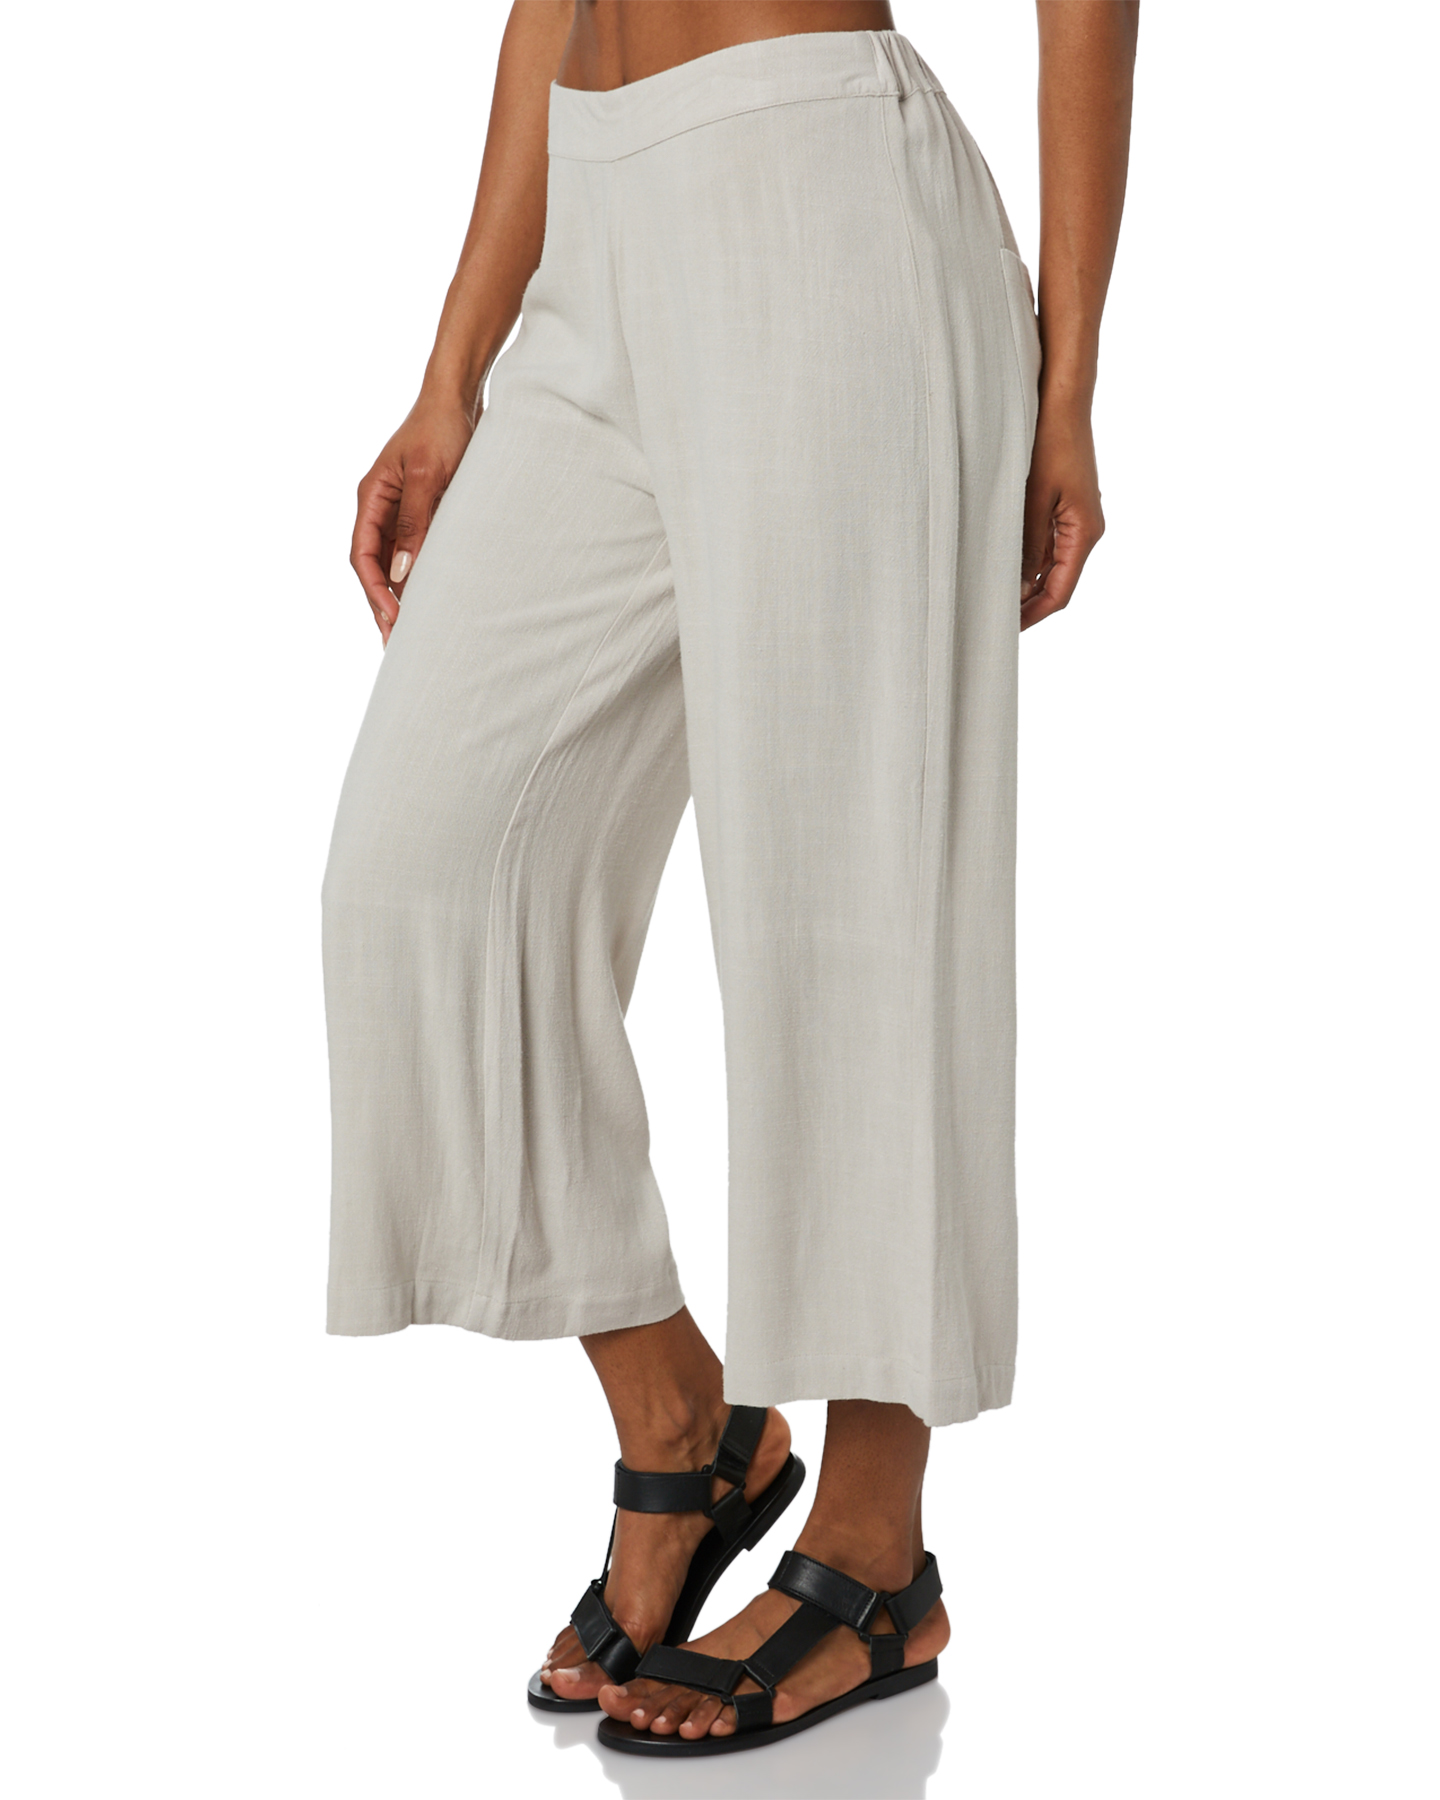 Swell Sundrenched Beach Pant - Stone | SurfStitch